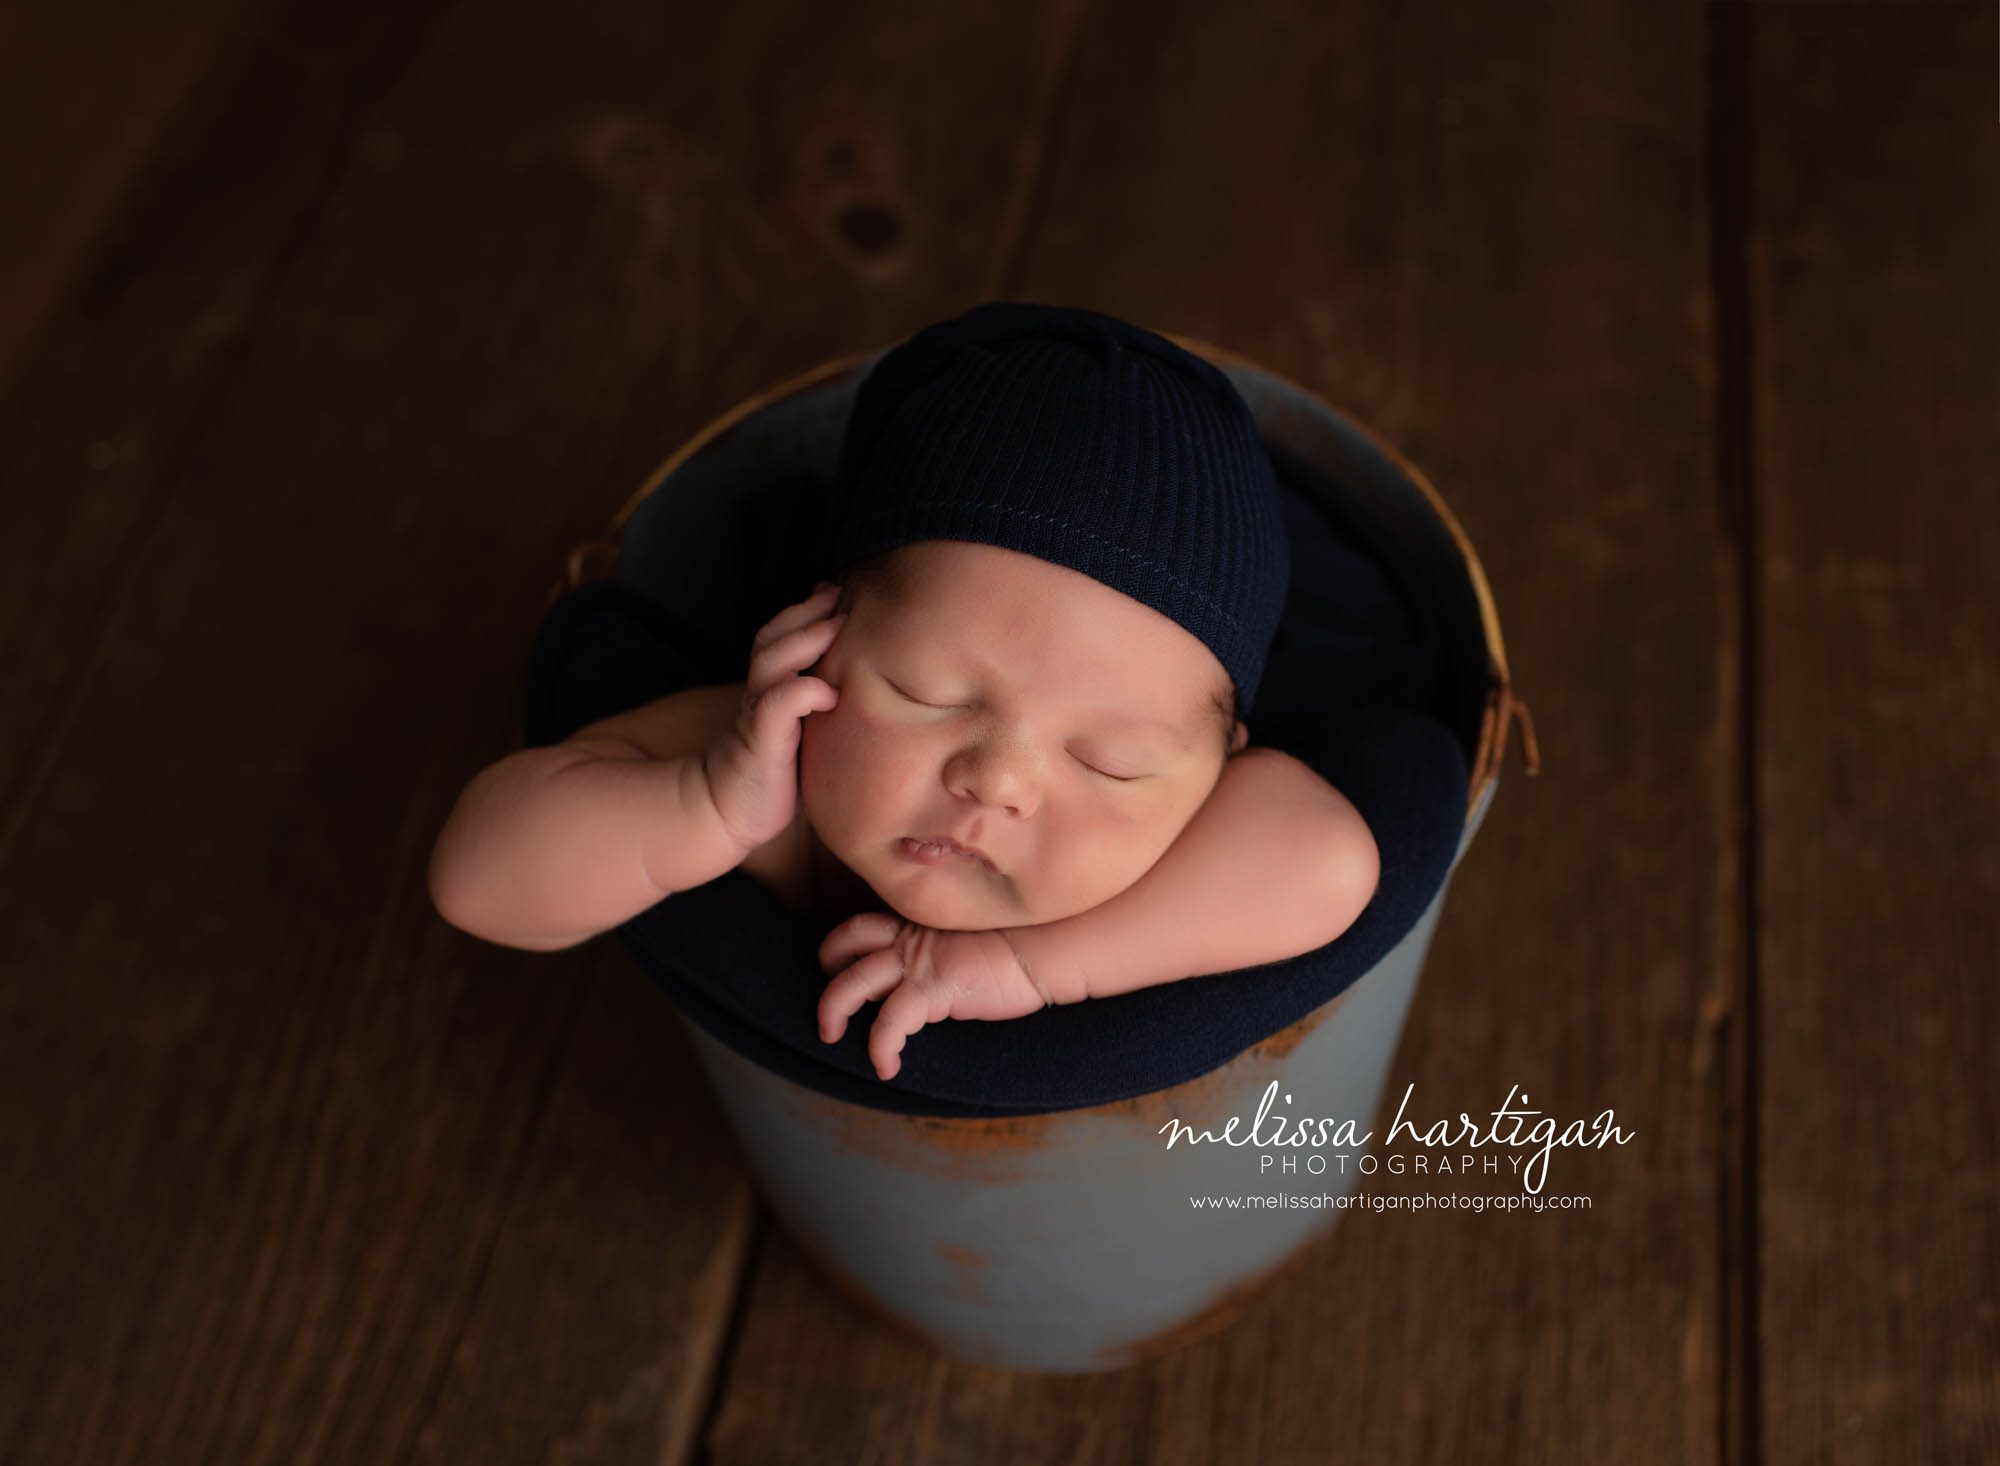 Baby boy posed in bucket with hand on cheek wearing navy blue hat